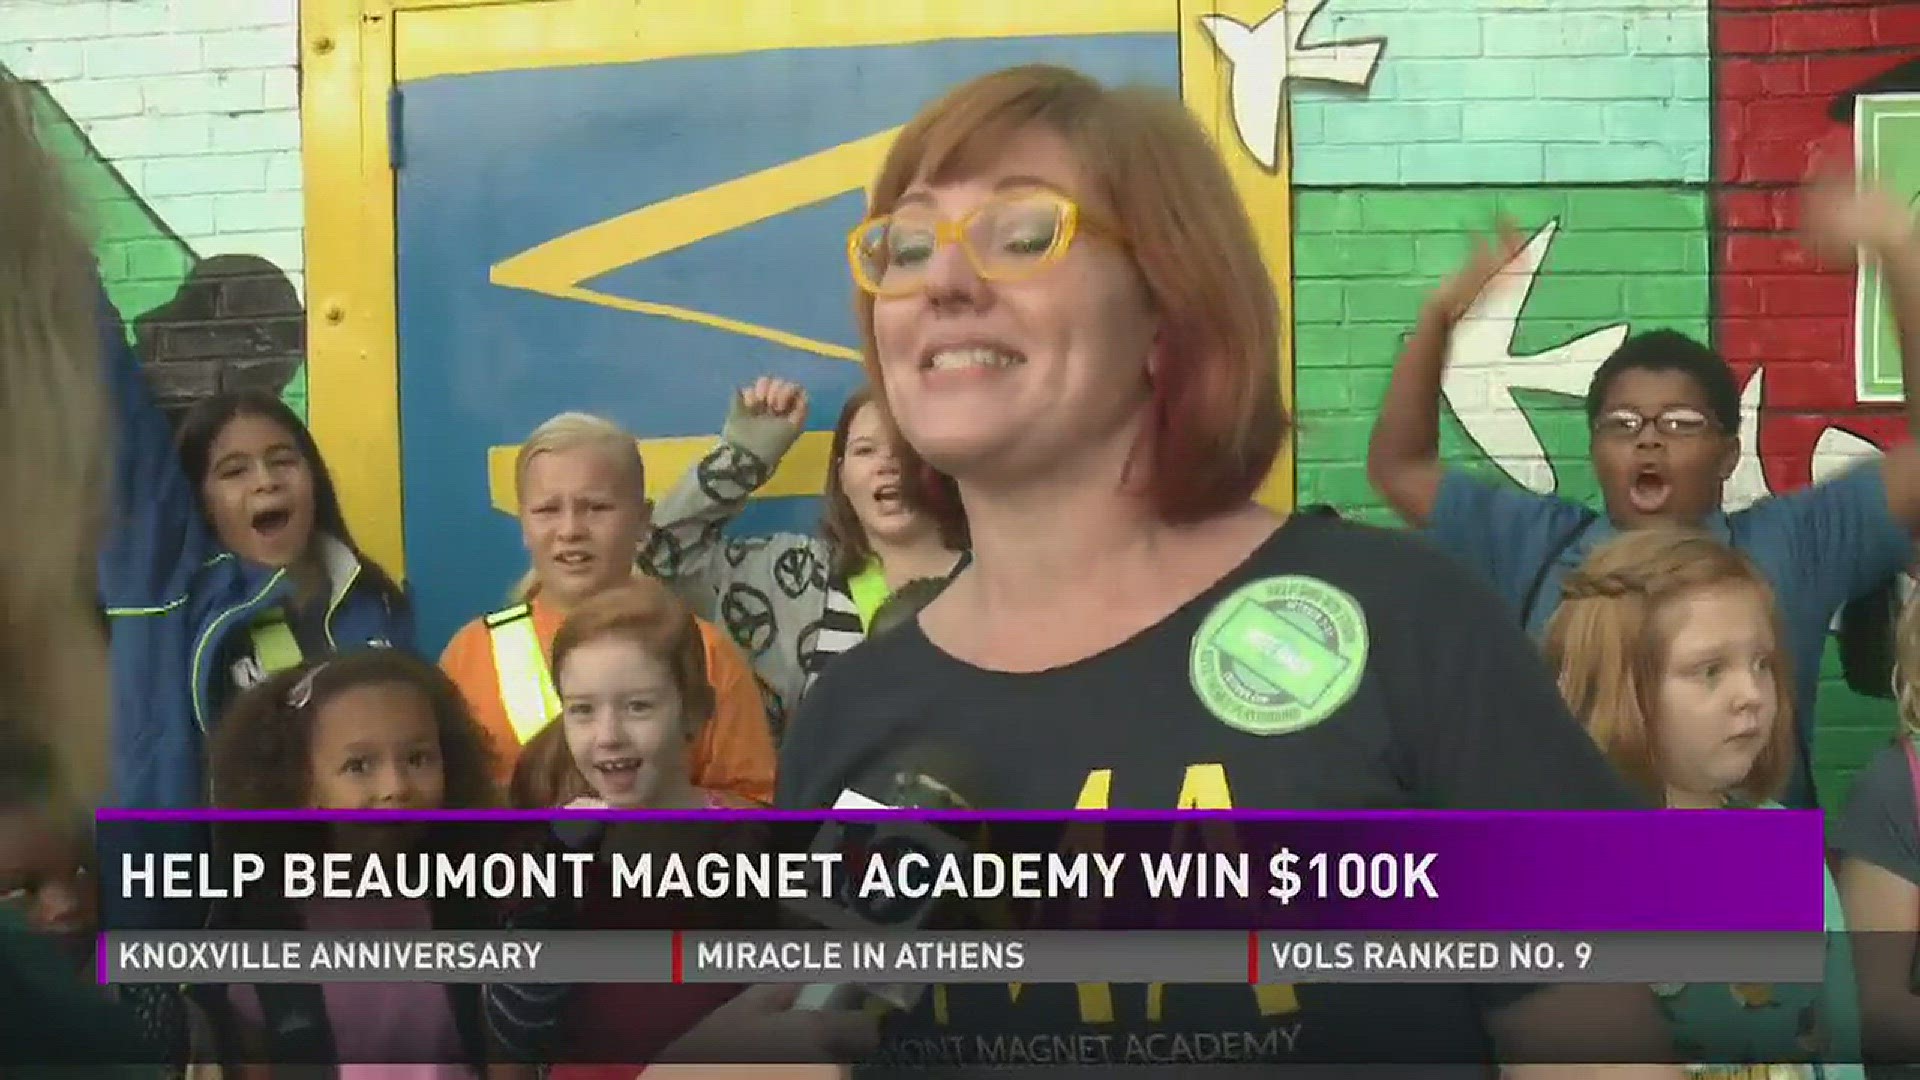 Beaumont Magnet Academy is the only school in Tennessee up for a $100,000 playground make-over grant.